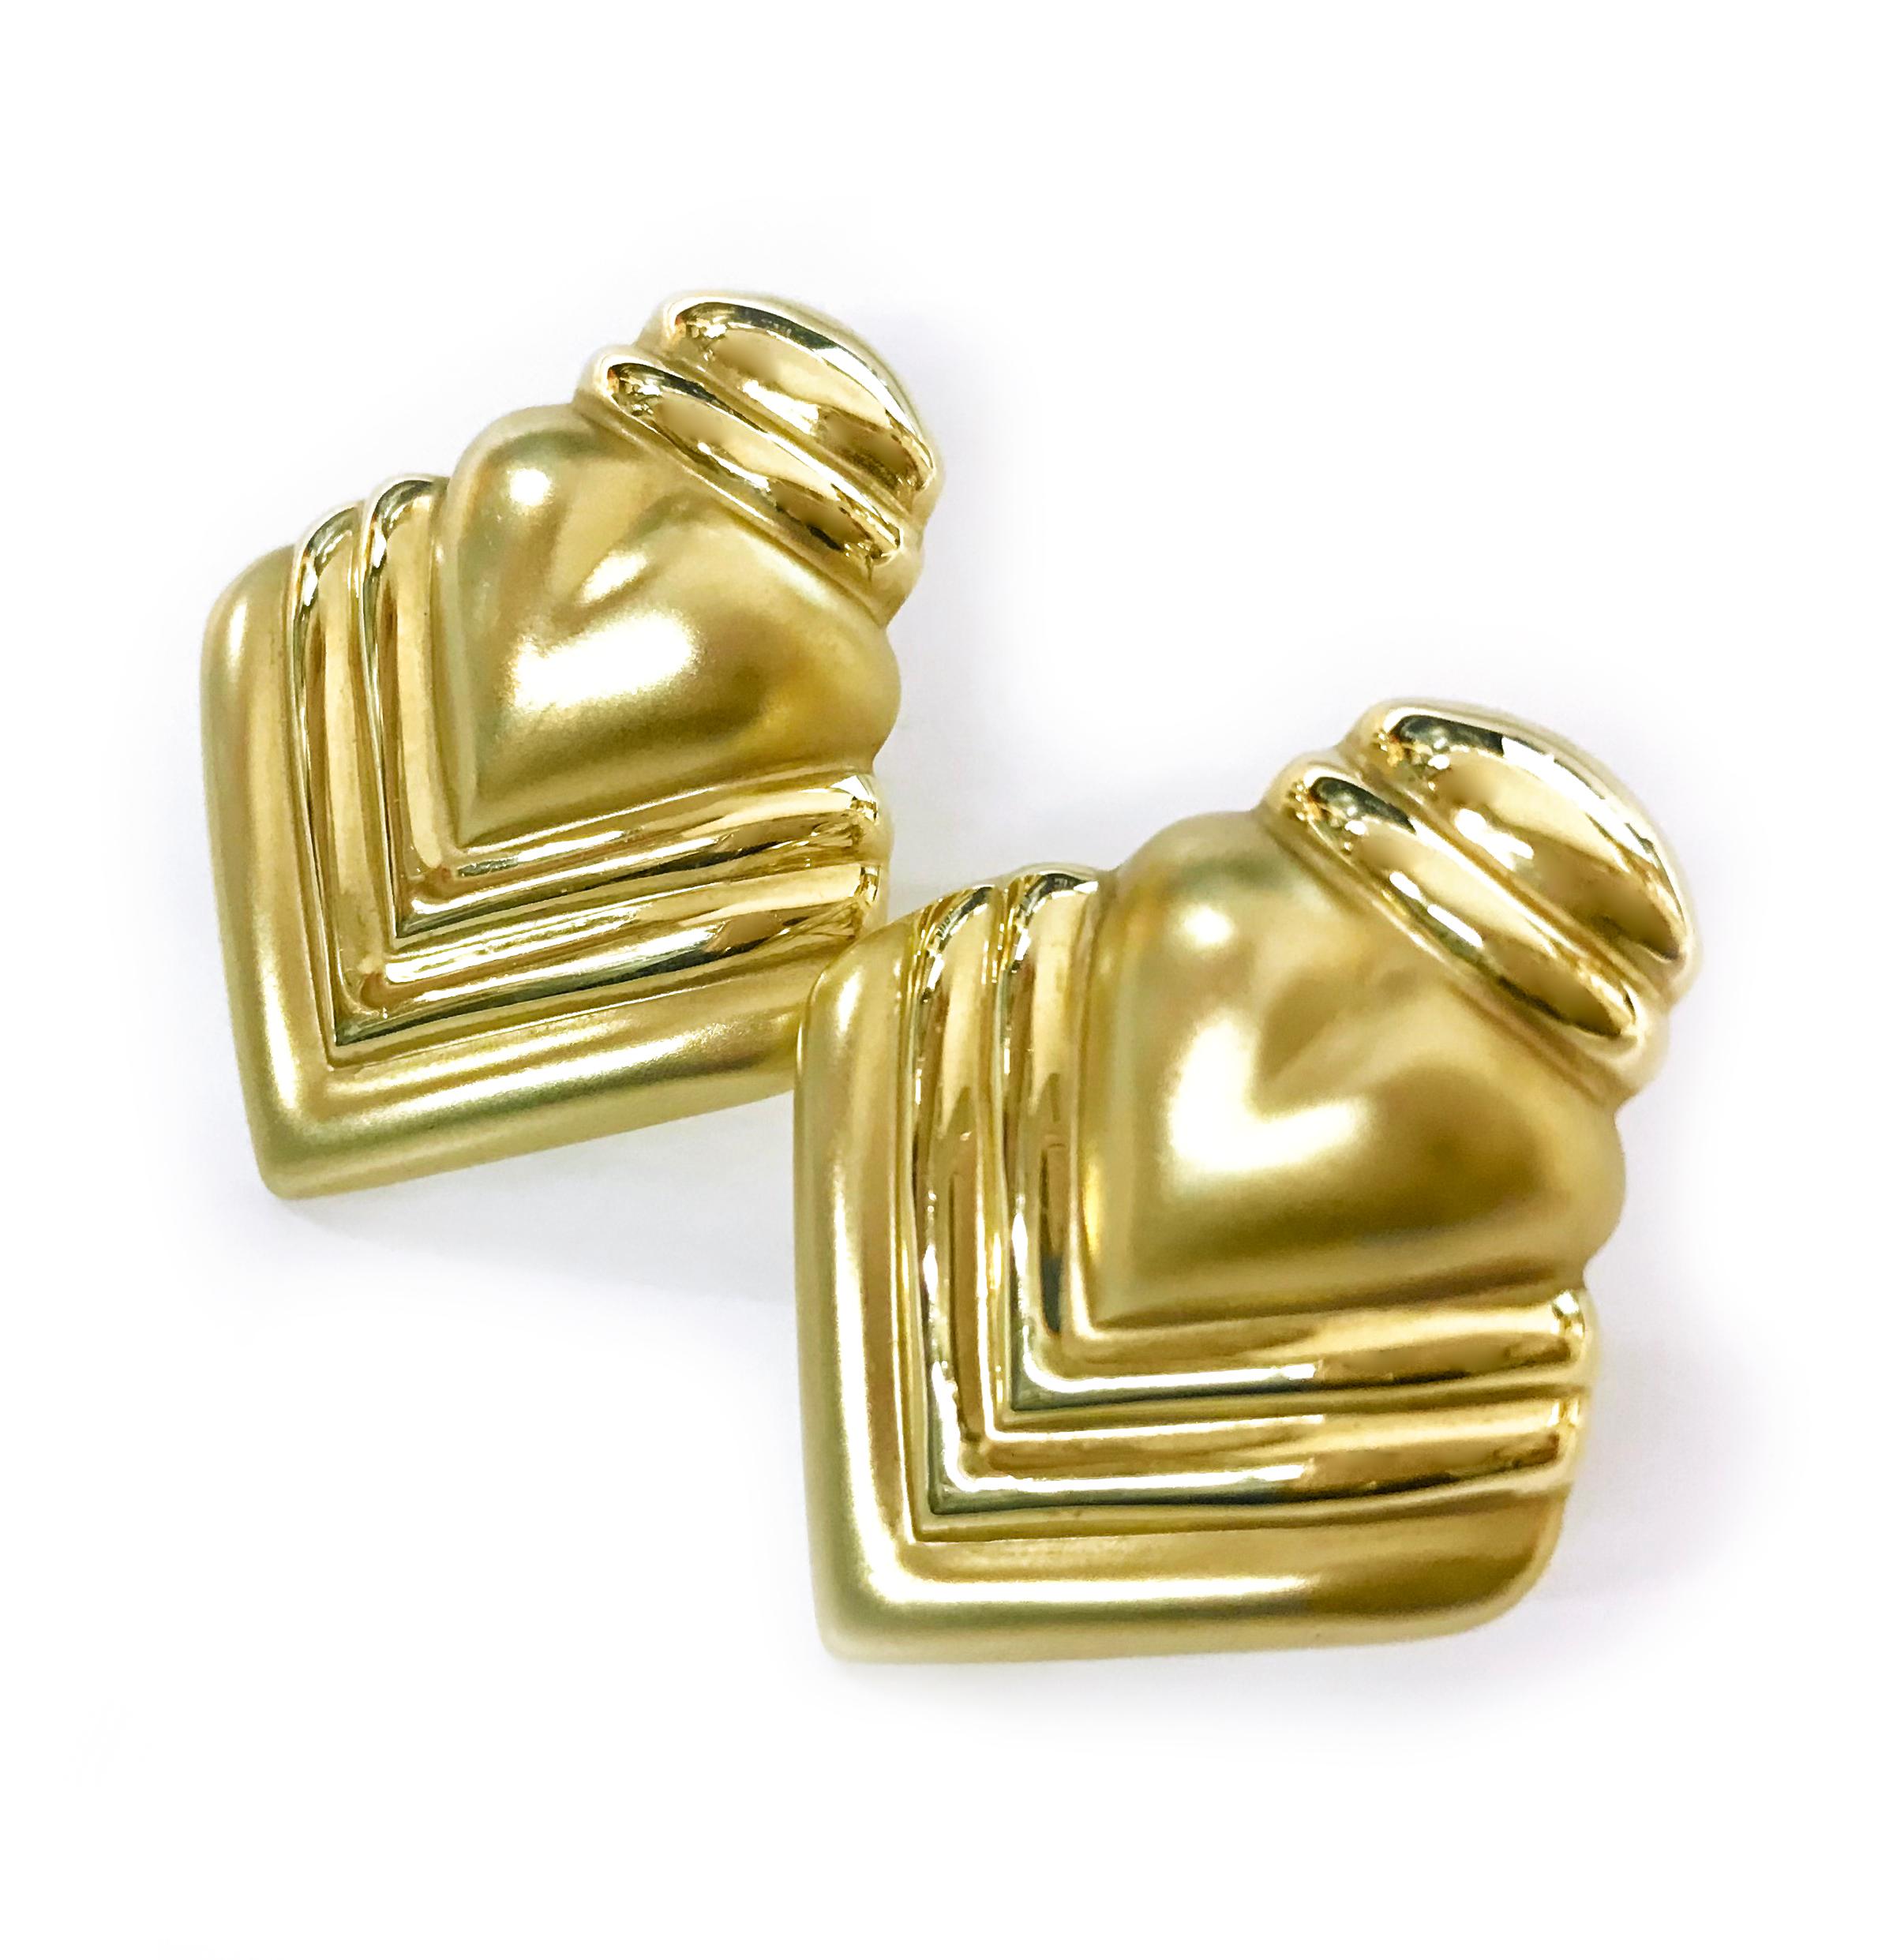 14 Karat Gold Ridged Heart Earrings. These lightweight clip-on earrings make a statement with their bold heart design. The earrings have an Art Deco style design and both satin and smooth shiny finish. The earrings have an Omega clip and a total